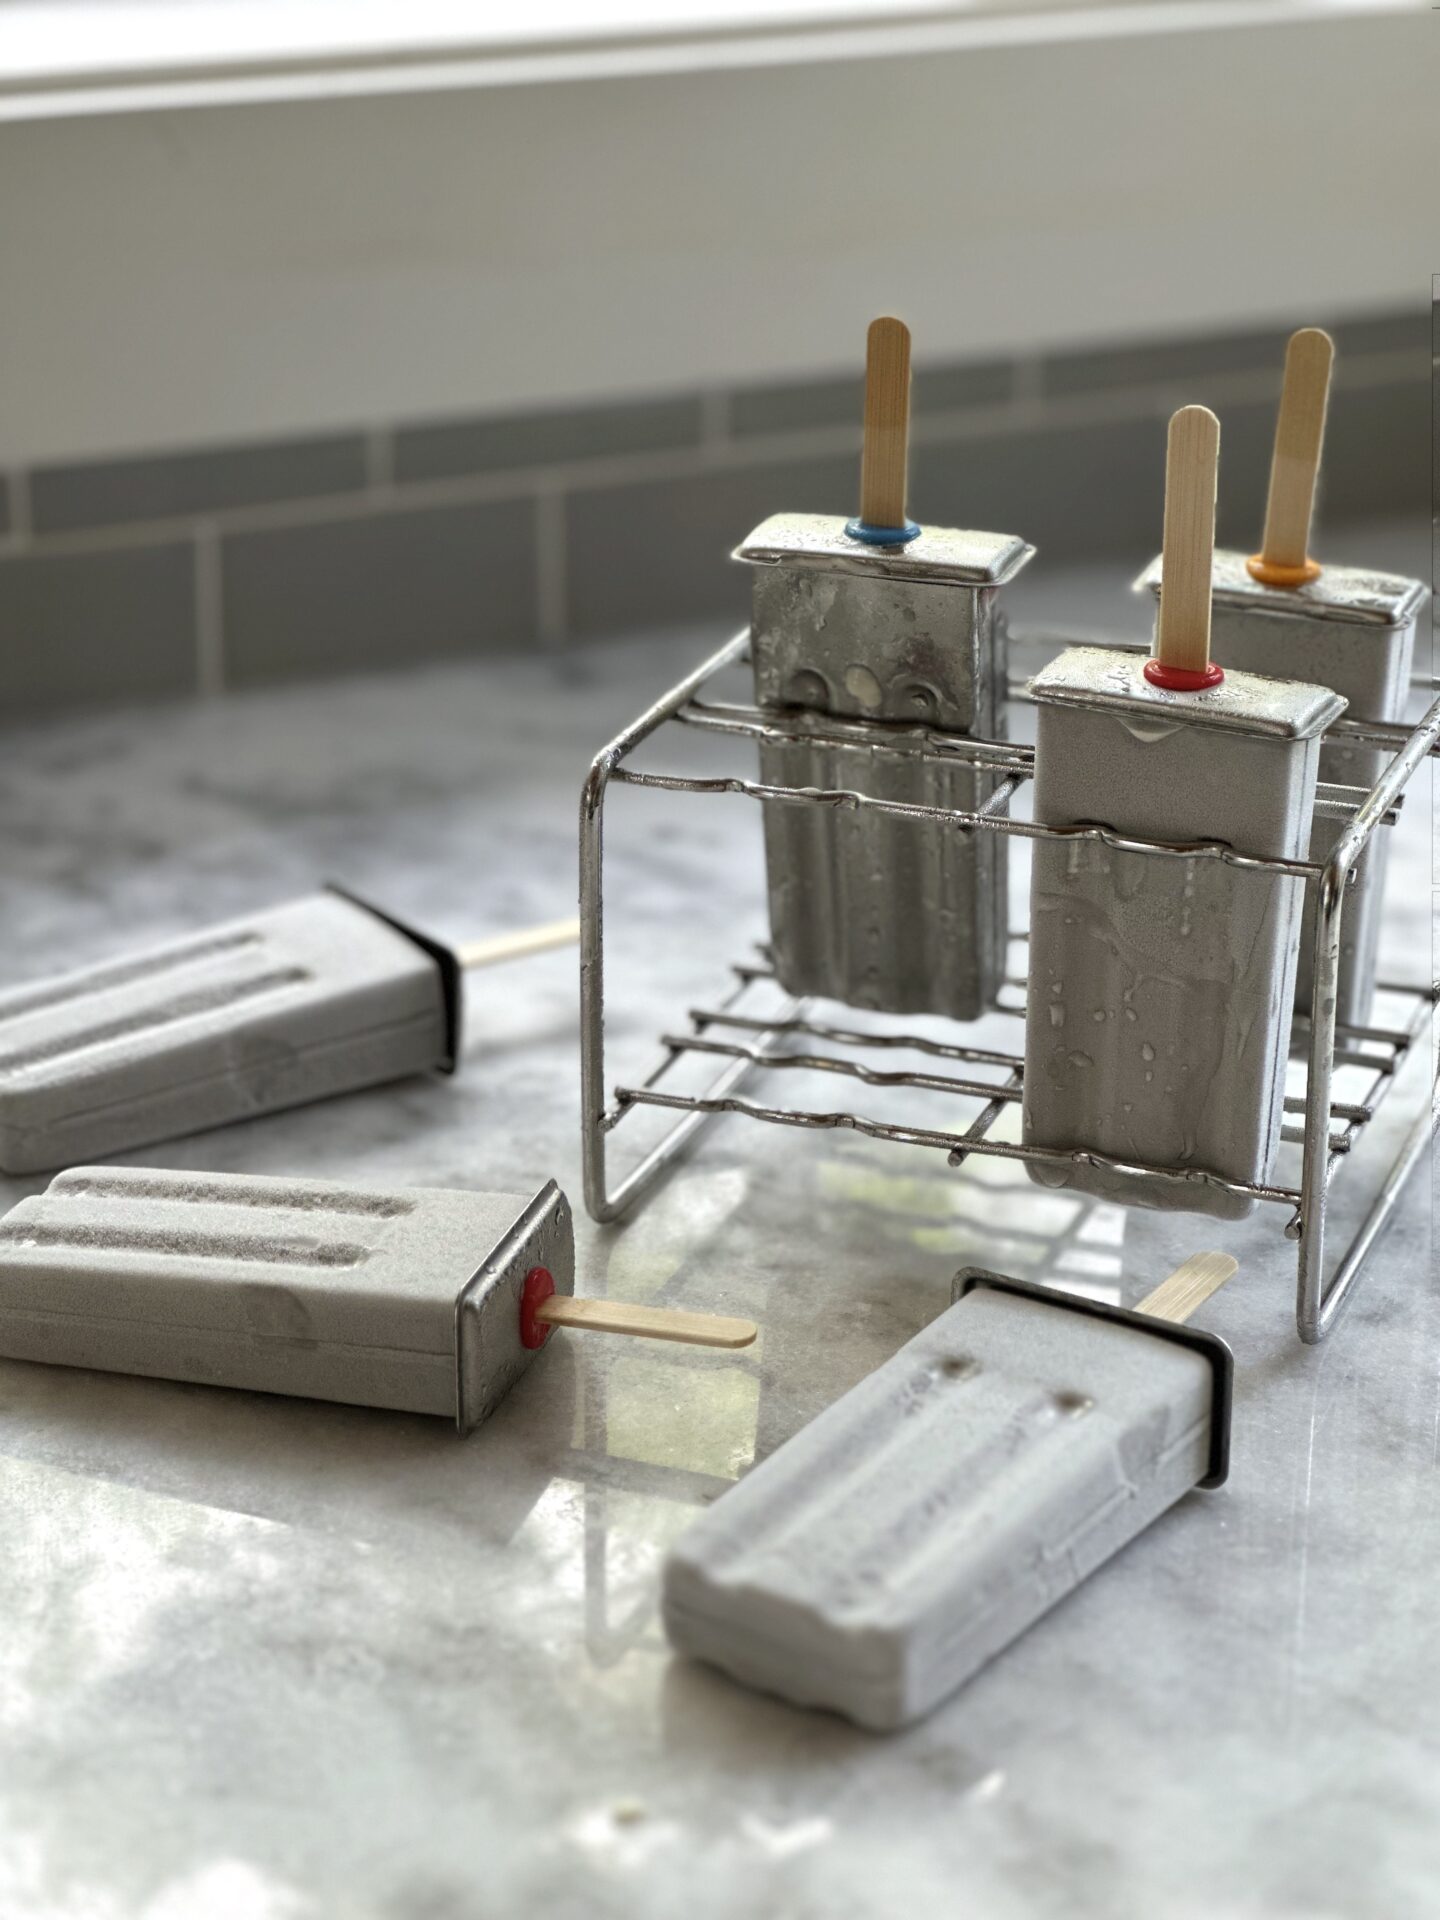 Homemade popsicles in frosty stainless steel popsicle moulds sitting on a white marble counter with grey tile backsplash in the background